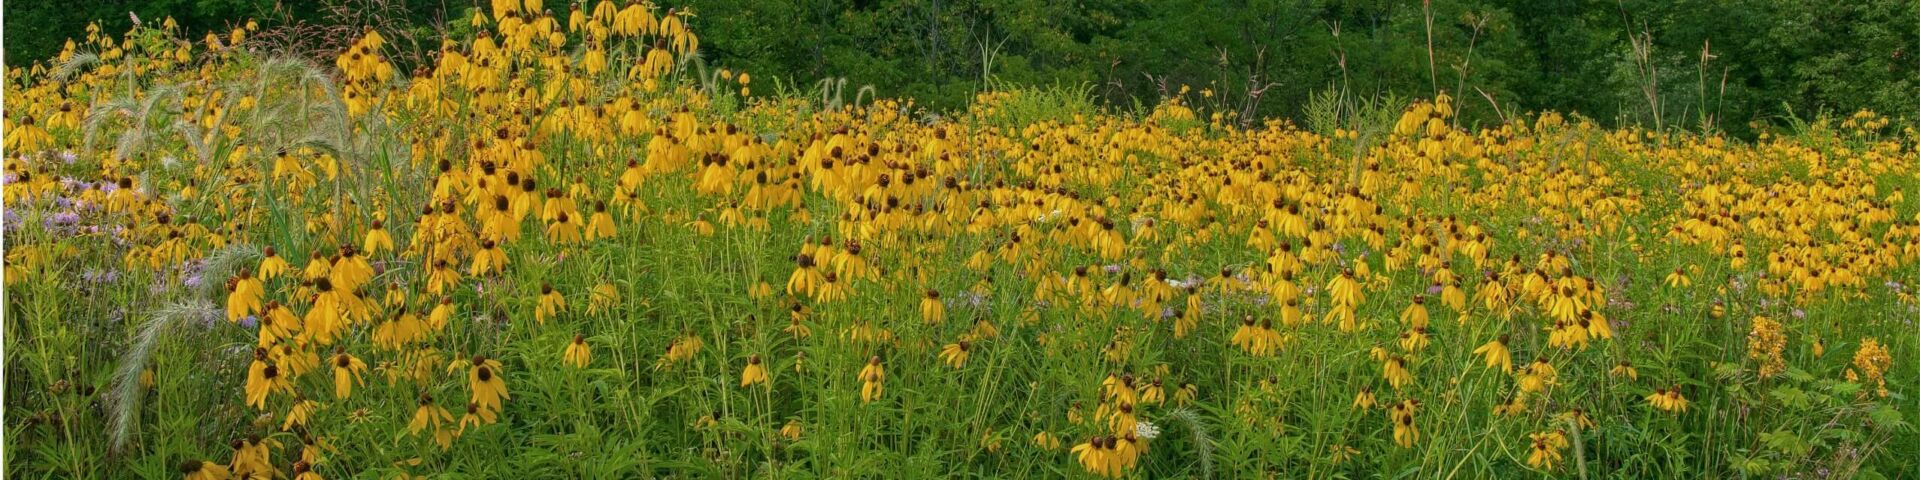 Field of black-eyed-susan flowers, yellow petals with dark brown centers, against a tree line, blue sky